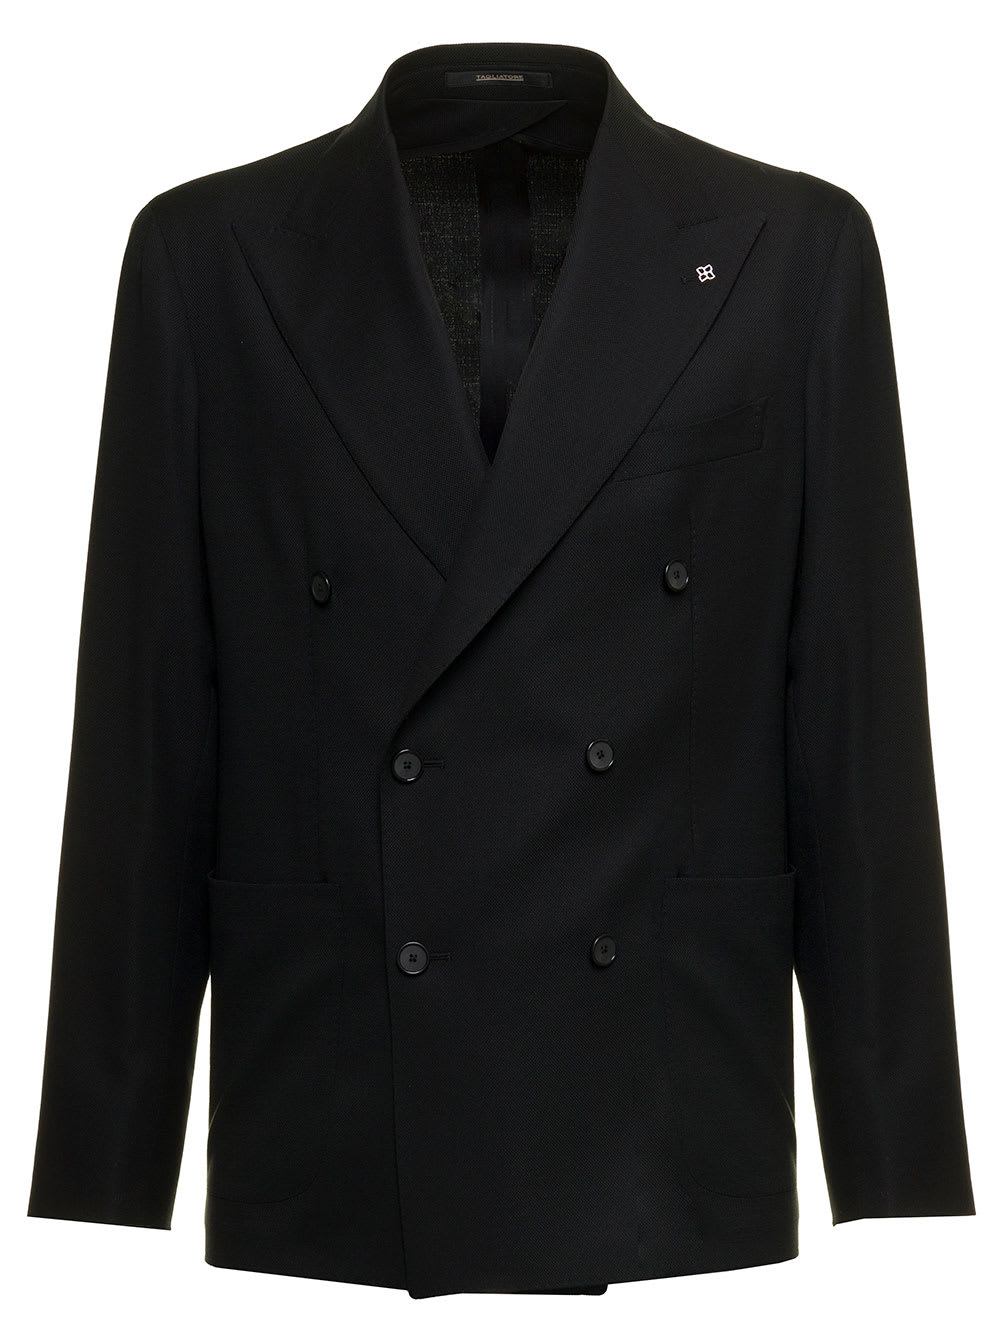 Tagliatore Mans Black Wool Double-breasted Jacket